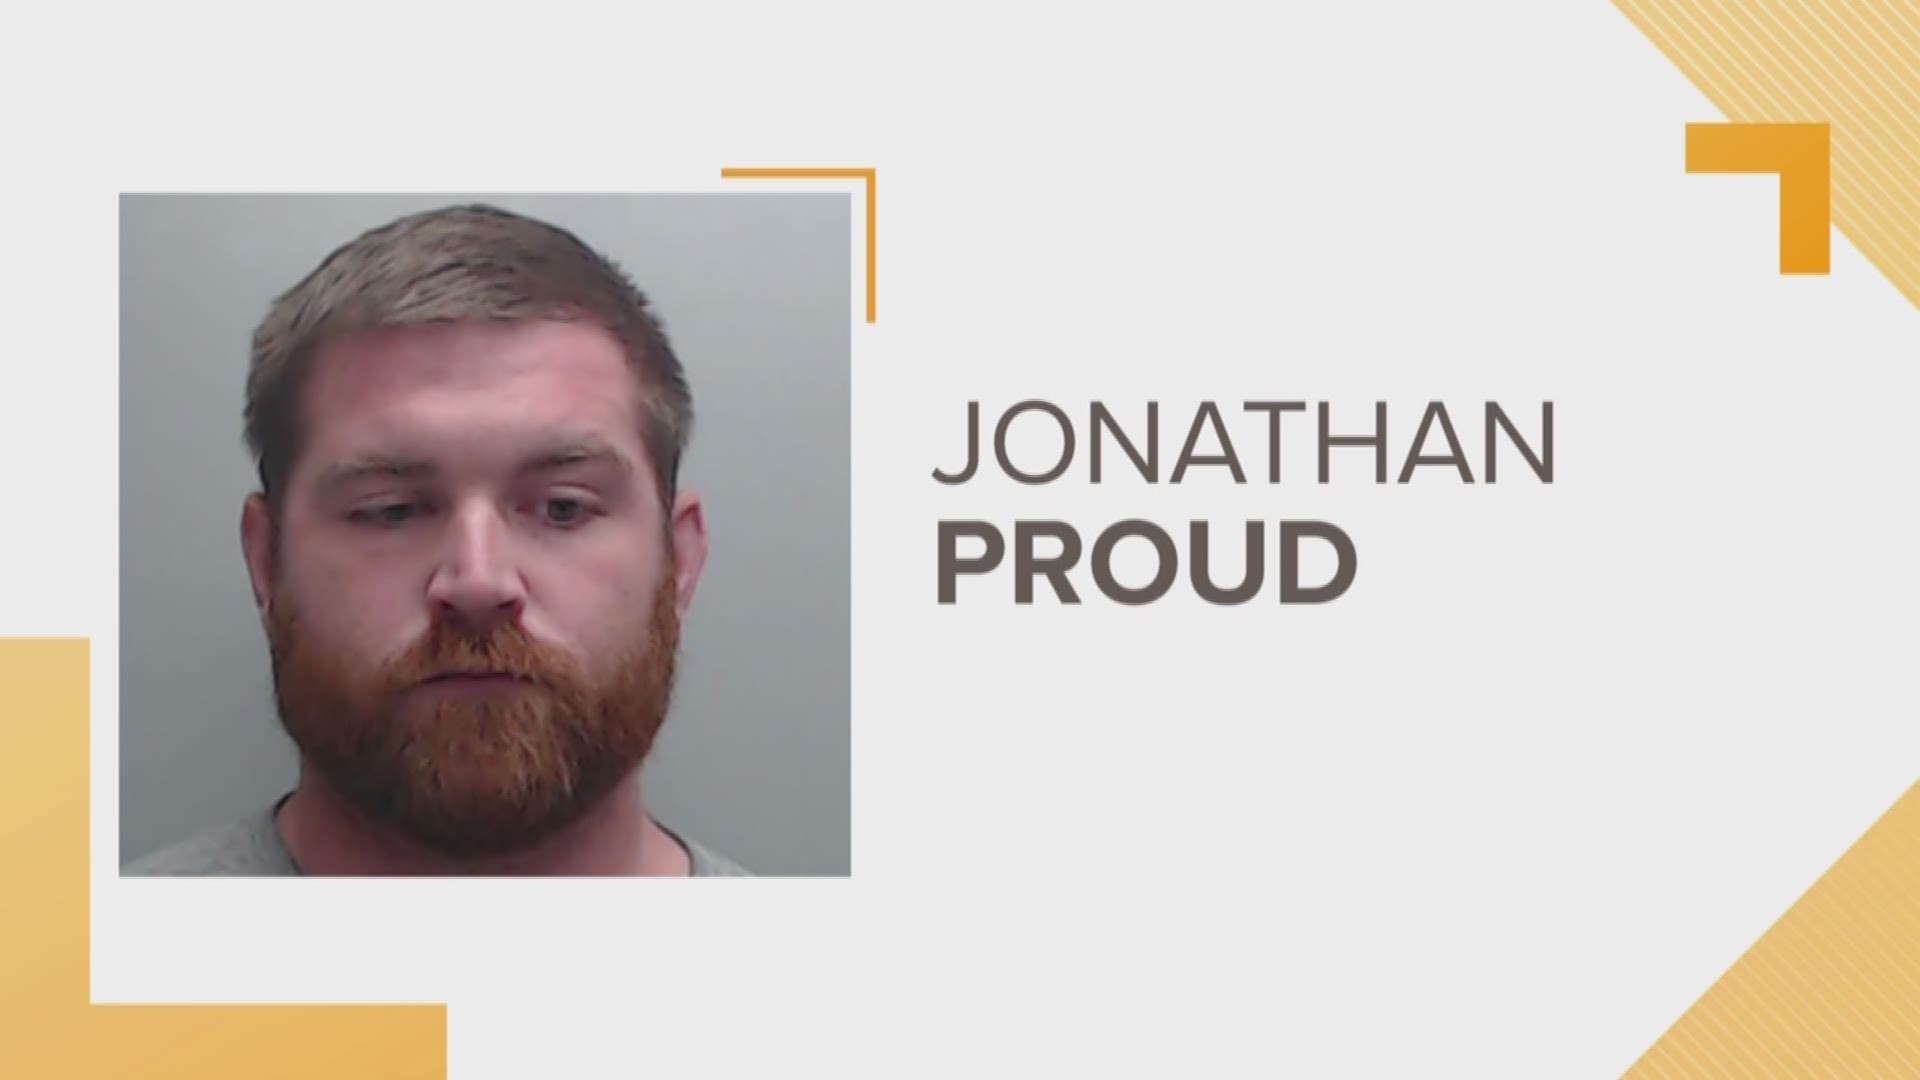 A coach at a Hays County High School is charged with possession of child porn after his wife said she found images on his phone.